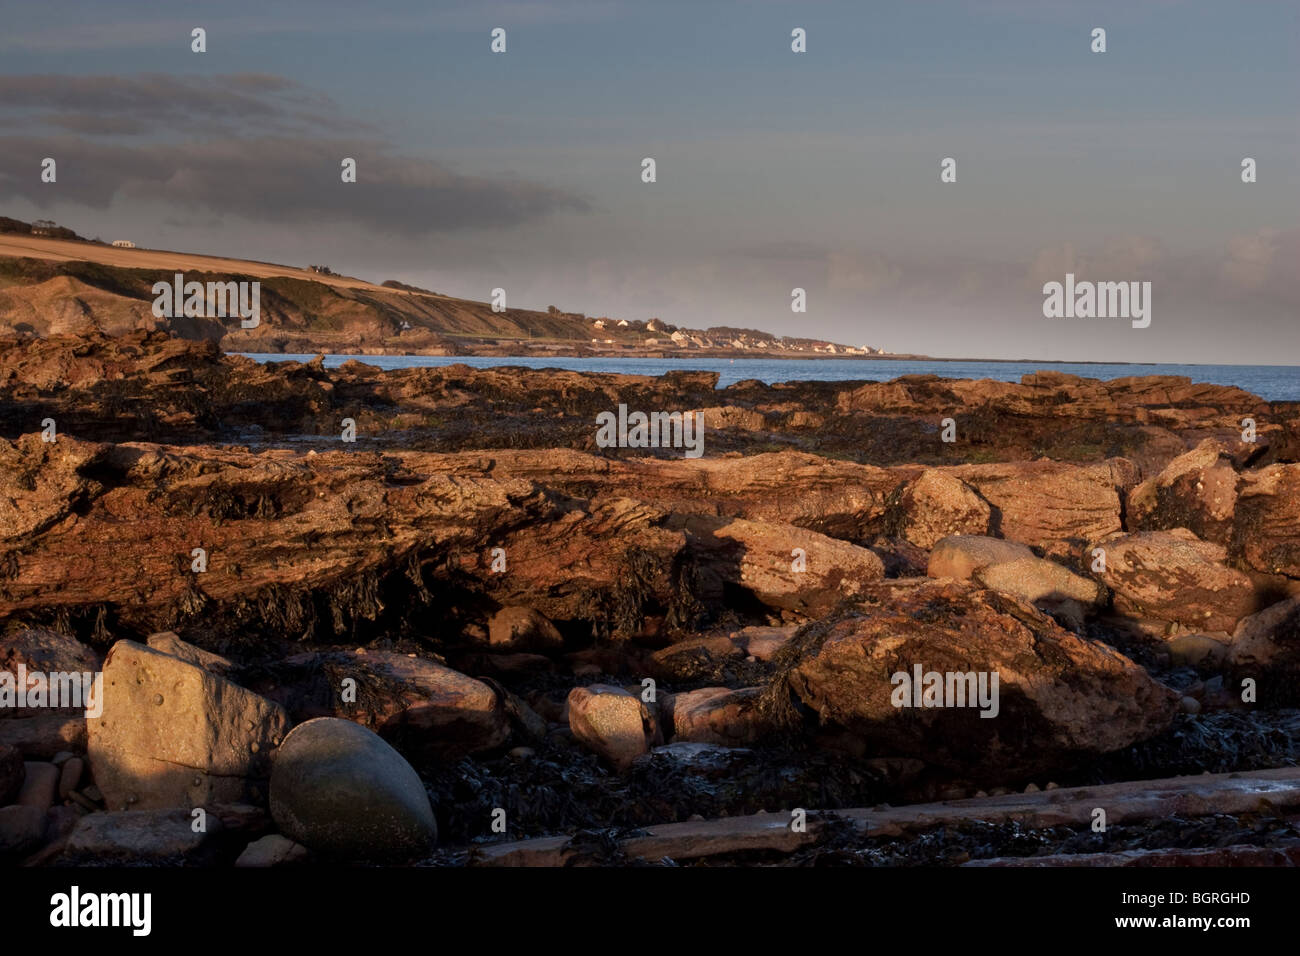 Exposed rocky shore at low tide, Montrose Bay, Scotland Stock Photo